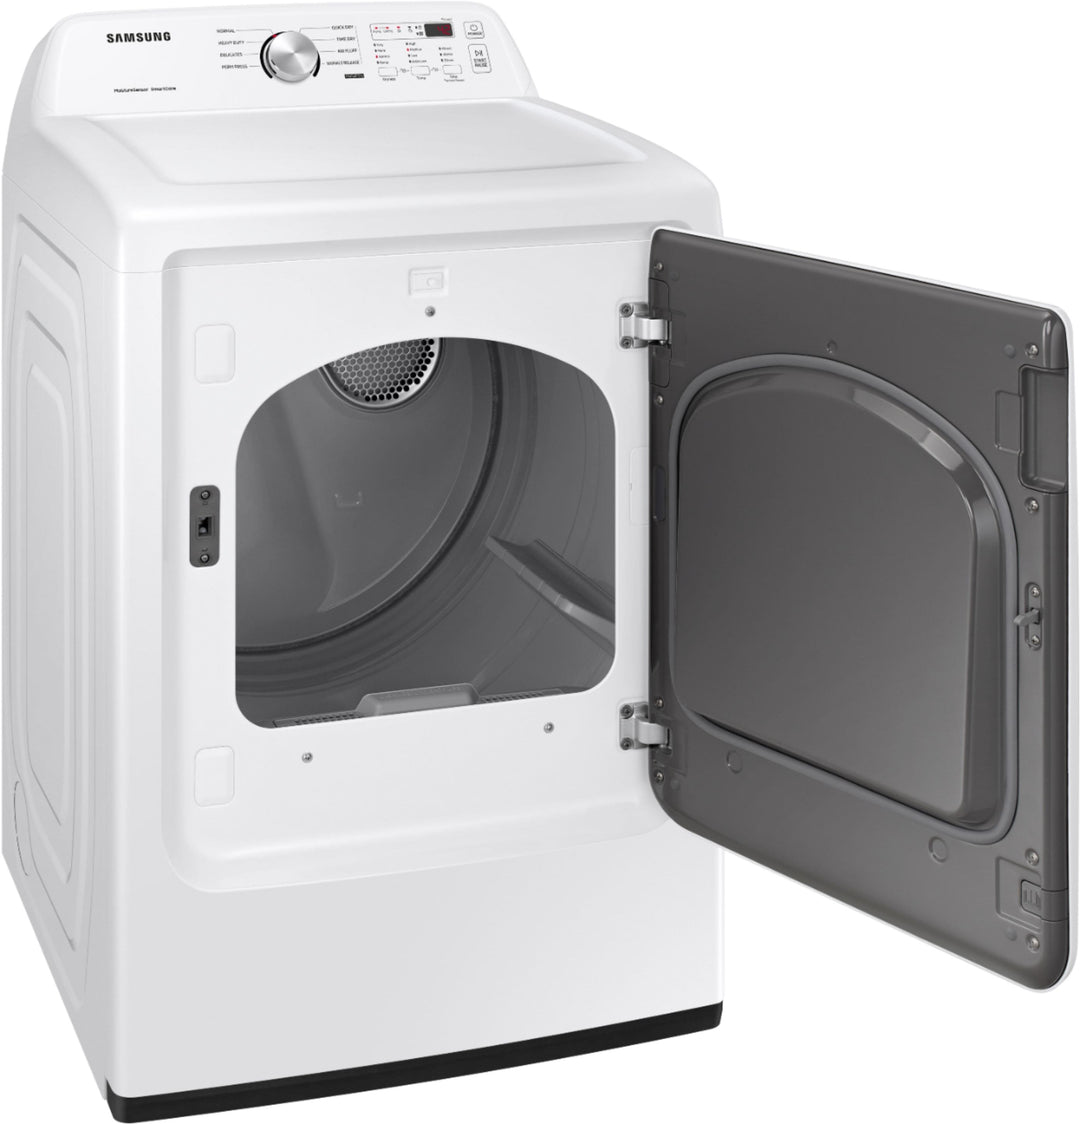 Samsung - 7.2 Cu. Ft. Electric Dryer with 8 Cycles and Sensor Dry - White_4